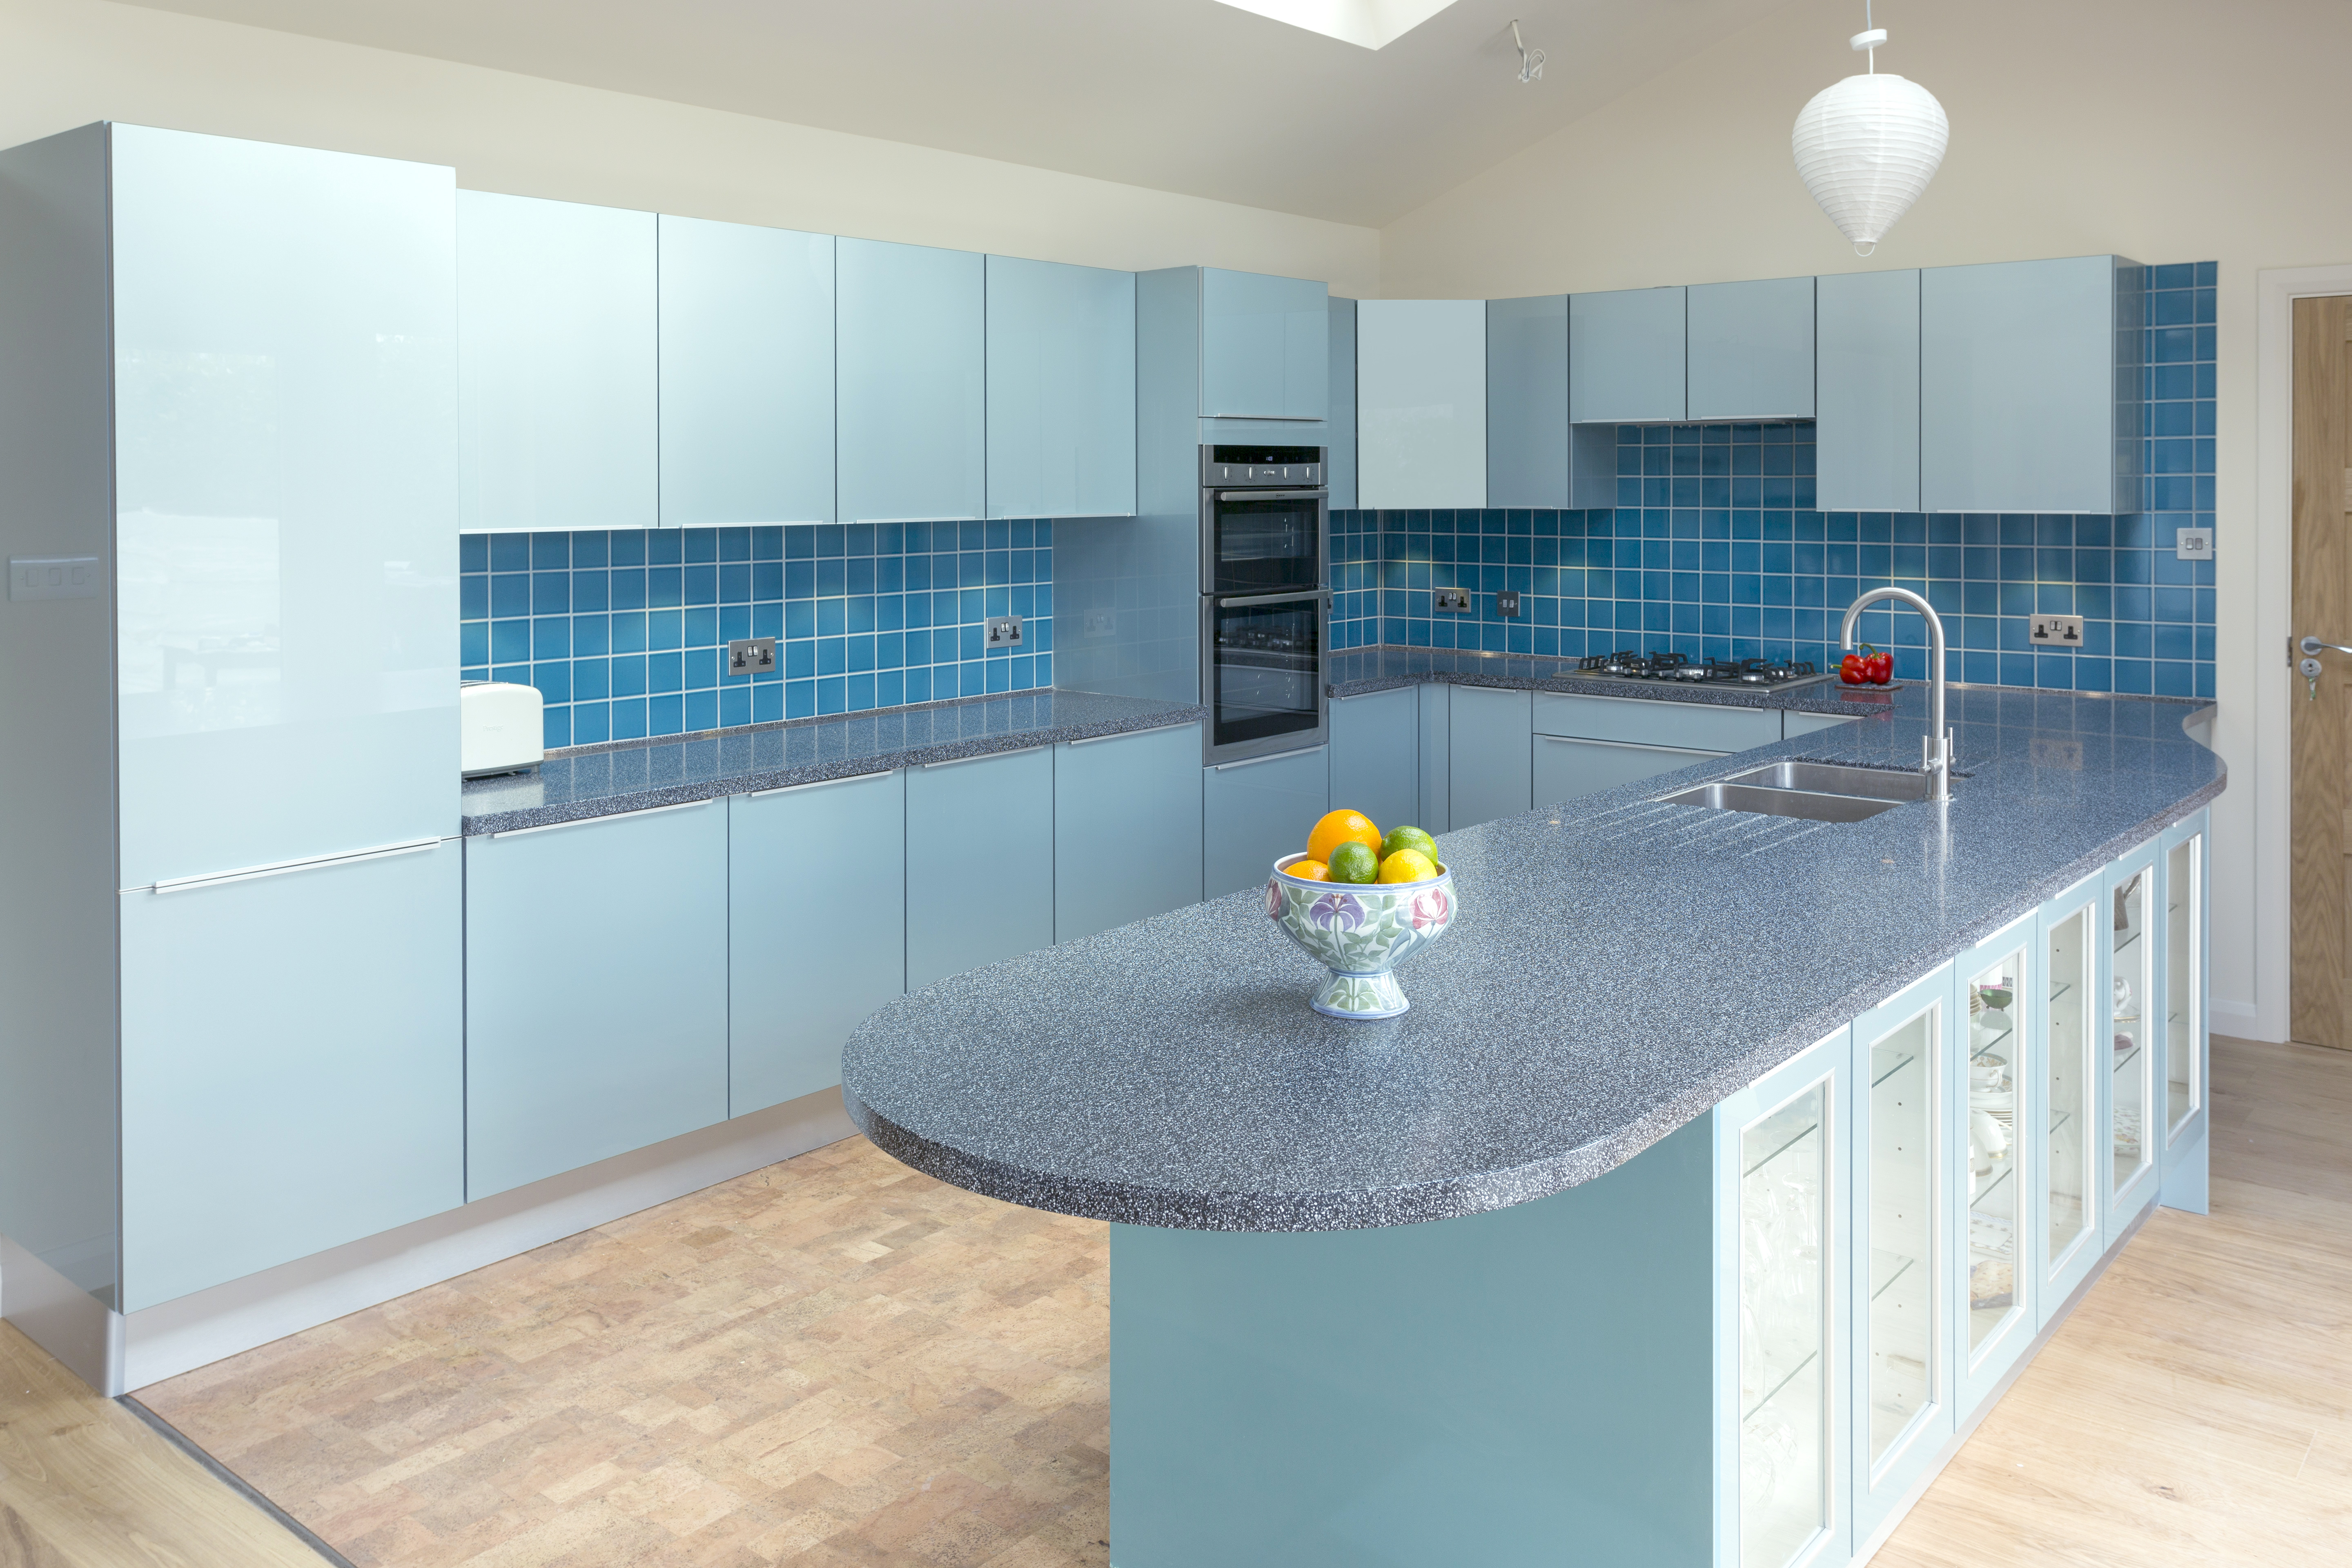 Private Client. Kitchen worksurfaces and splashbacks